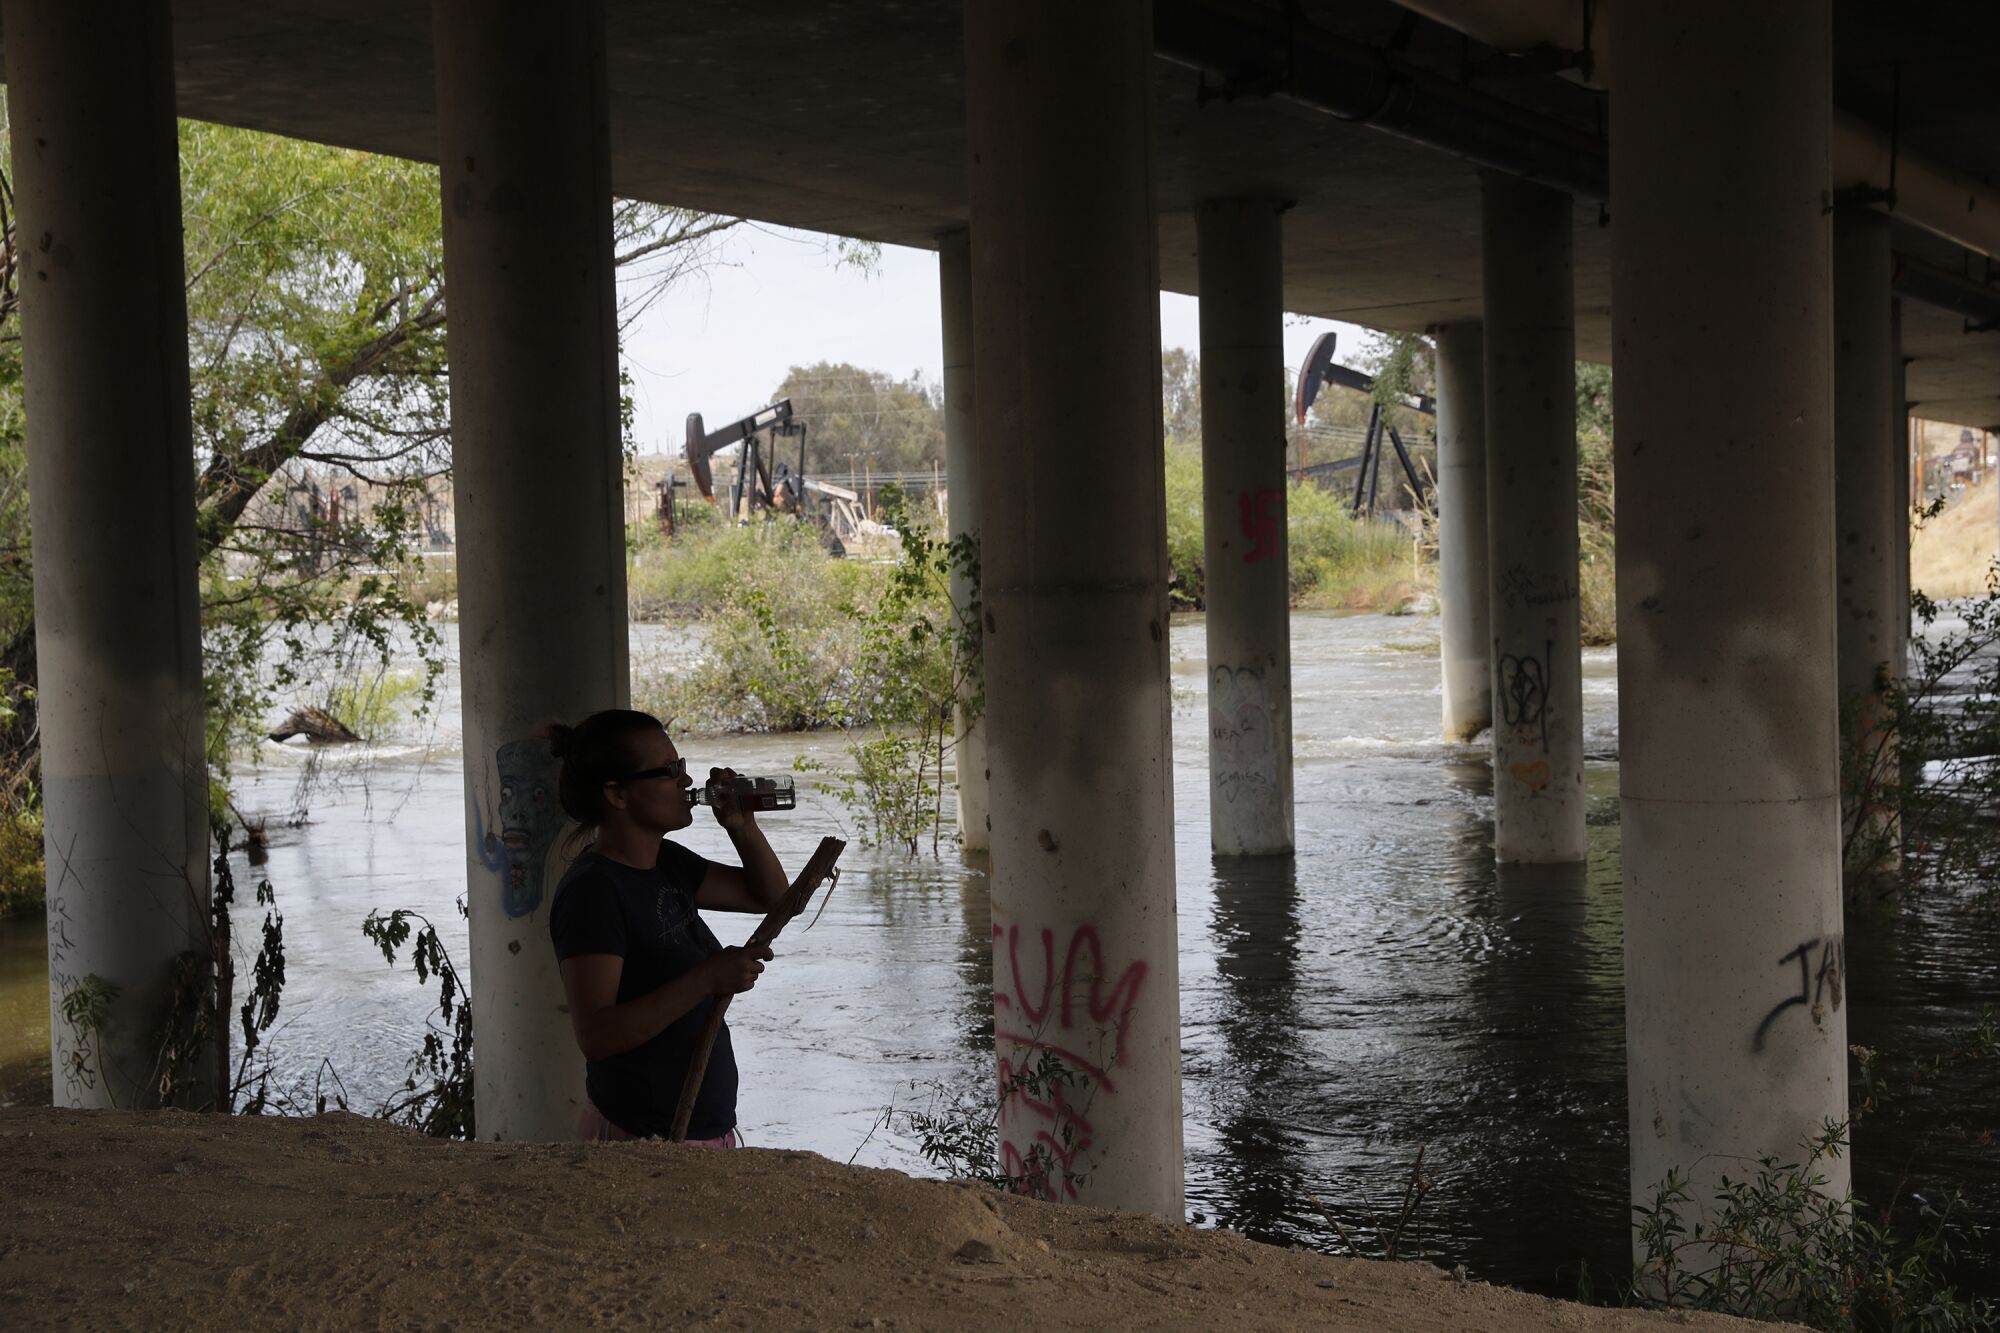 A woman drinks from bottle on a river bank beneath a bridge.